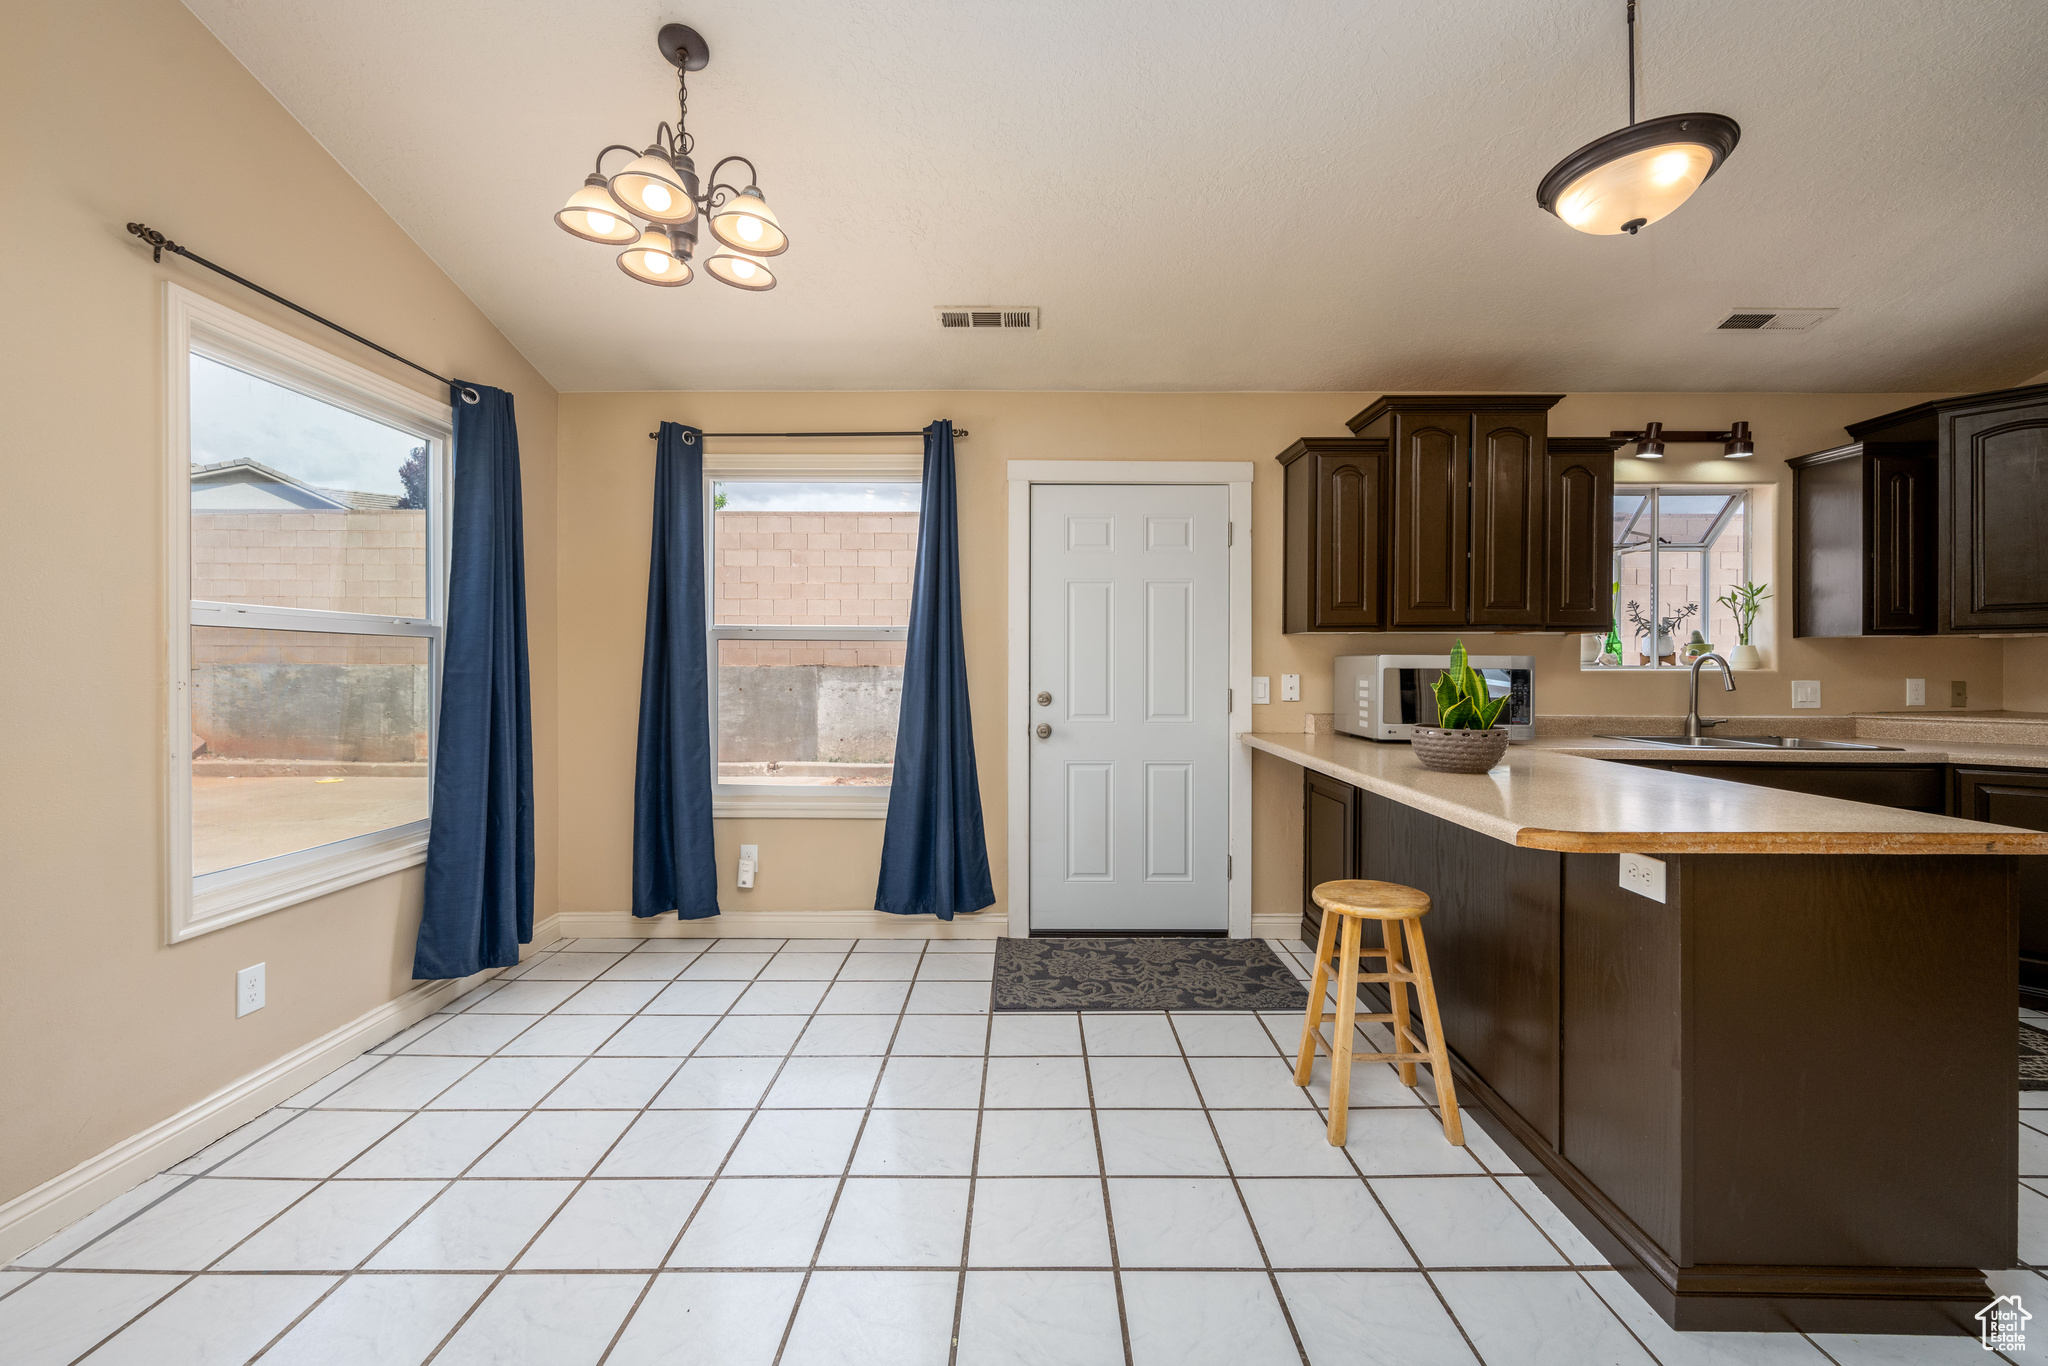 Kitchen featuring decorative light fixtures, a breakfast bar, sink, vaulted ceiling, and light tile floors